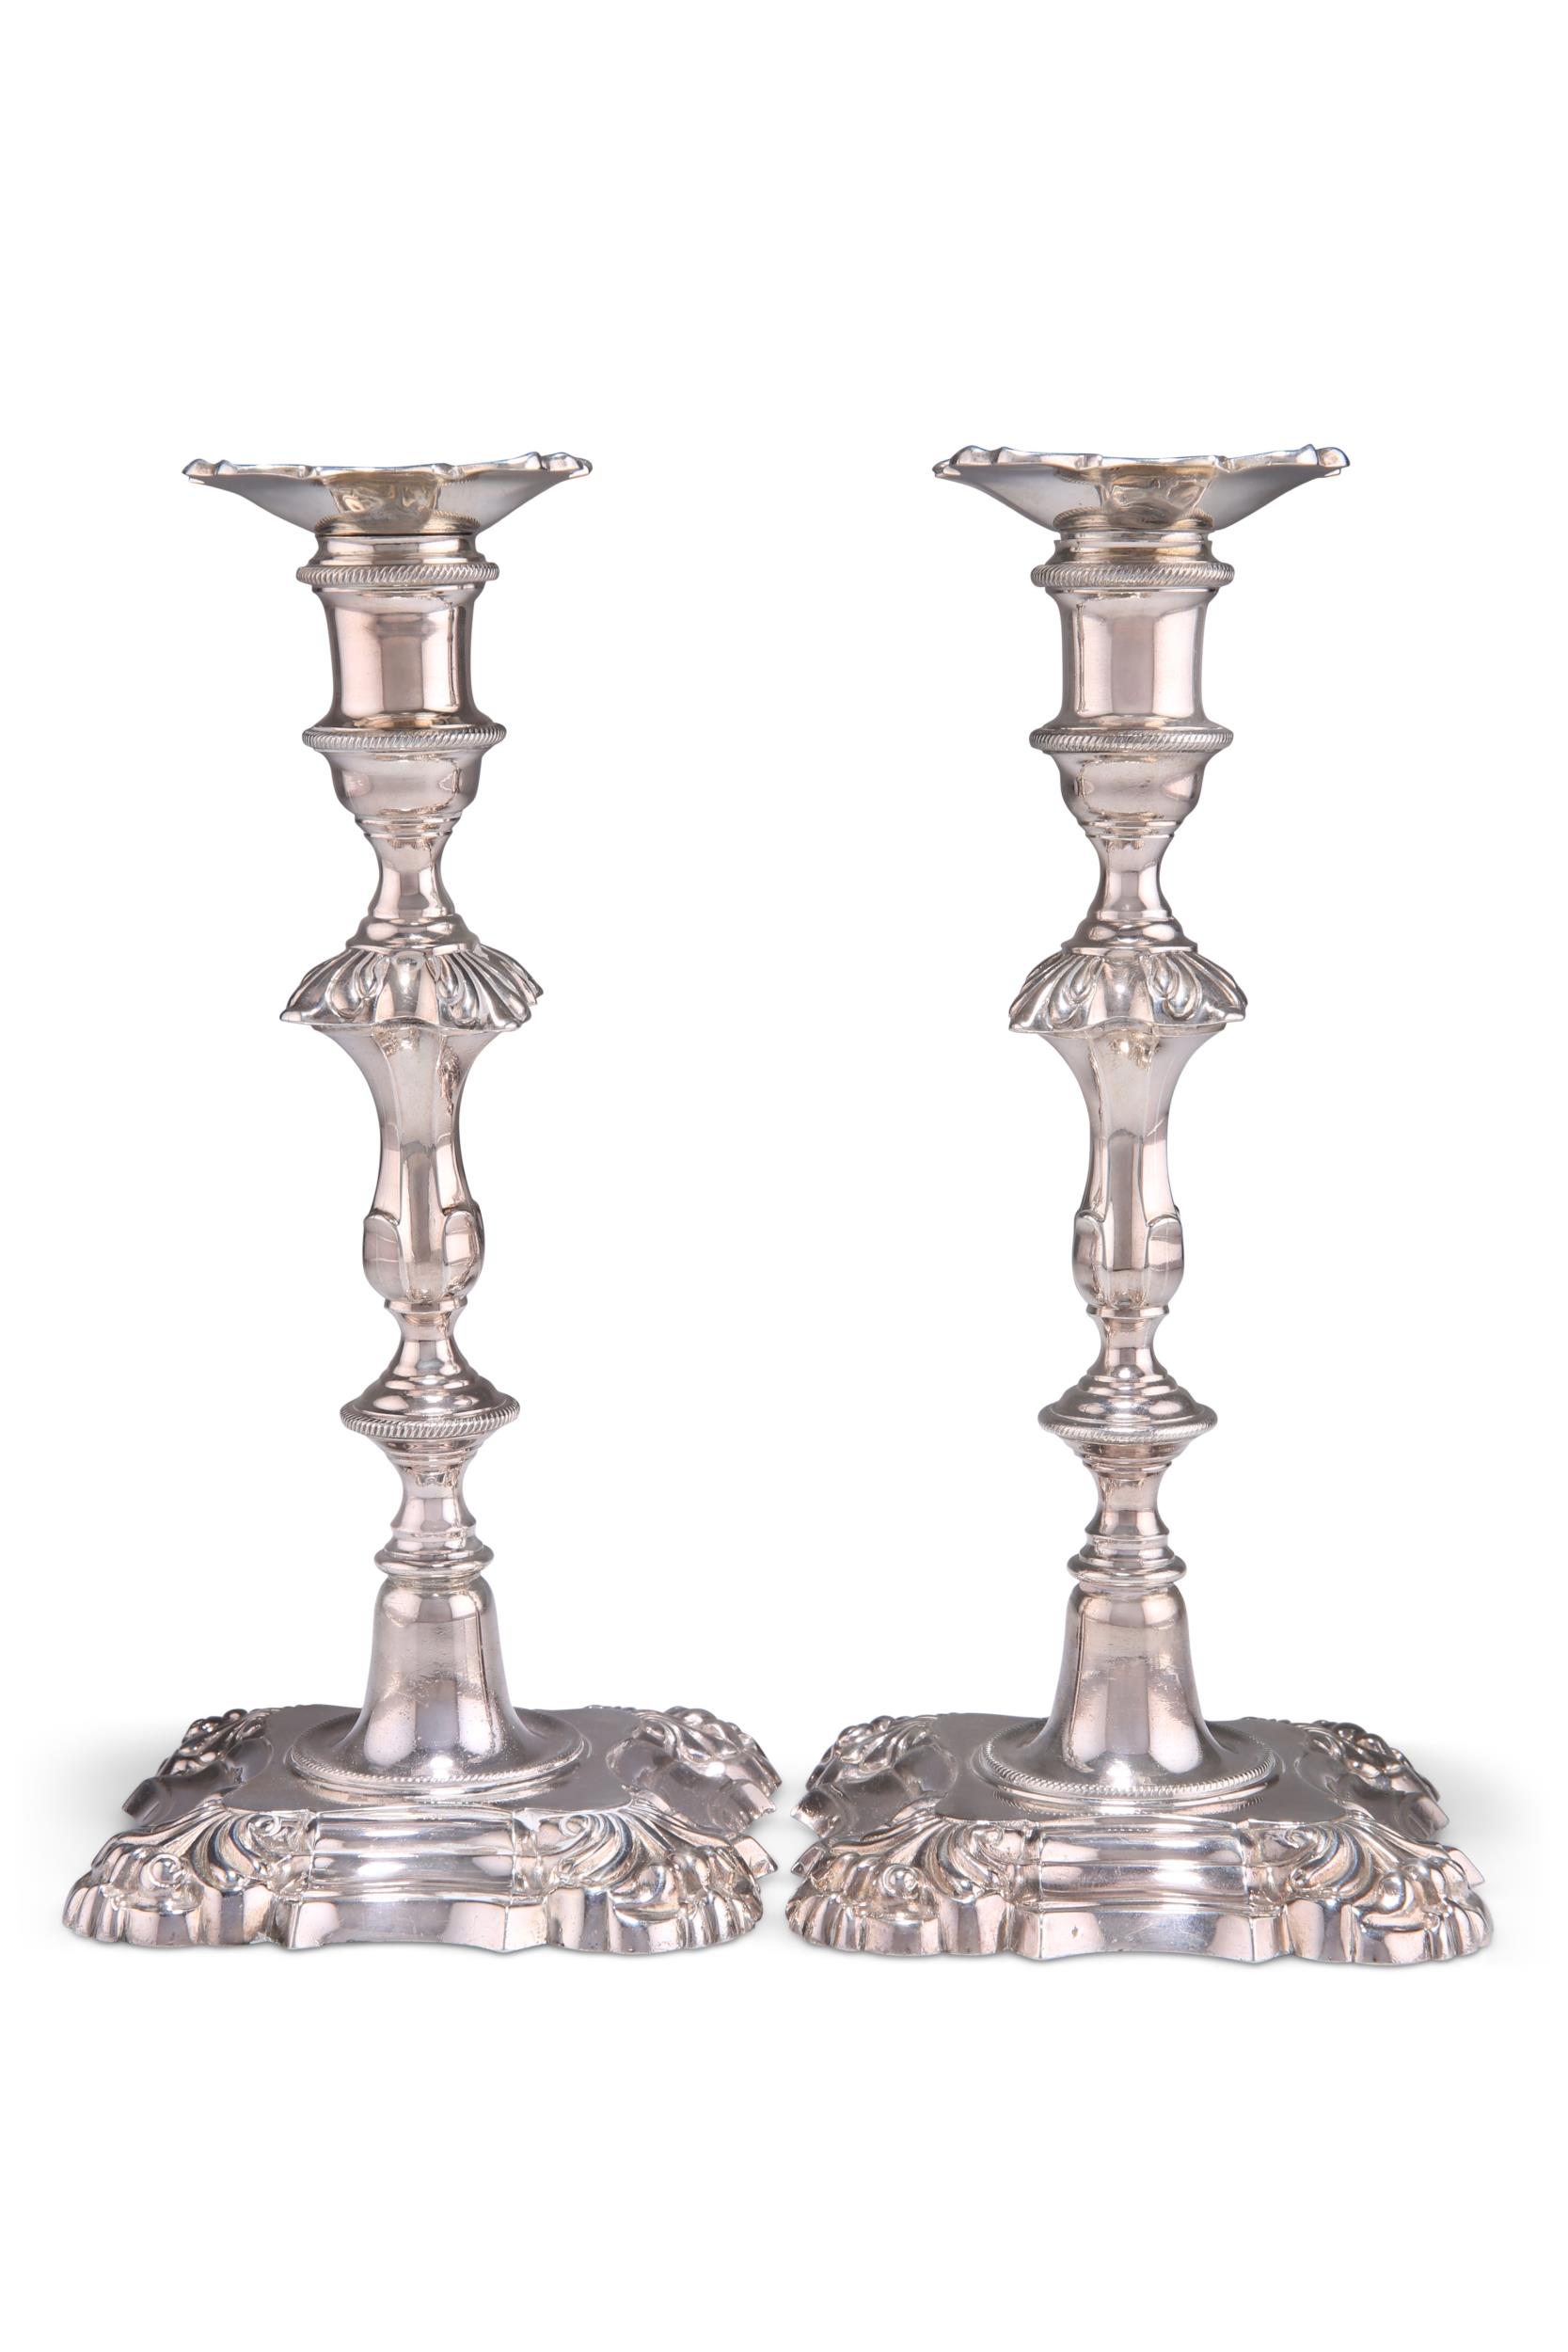 A PAIR OF ELIZABETH II SILVER CANDLESTICKS - Image 2 of 4